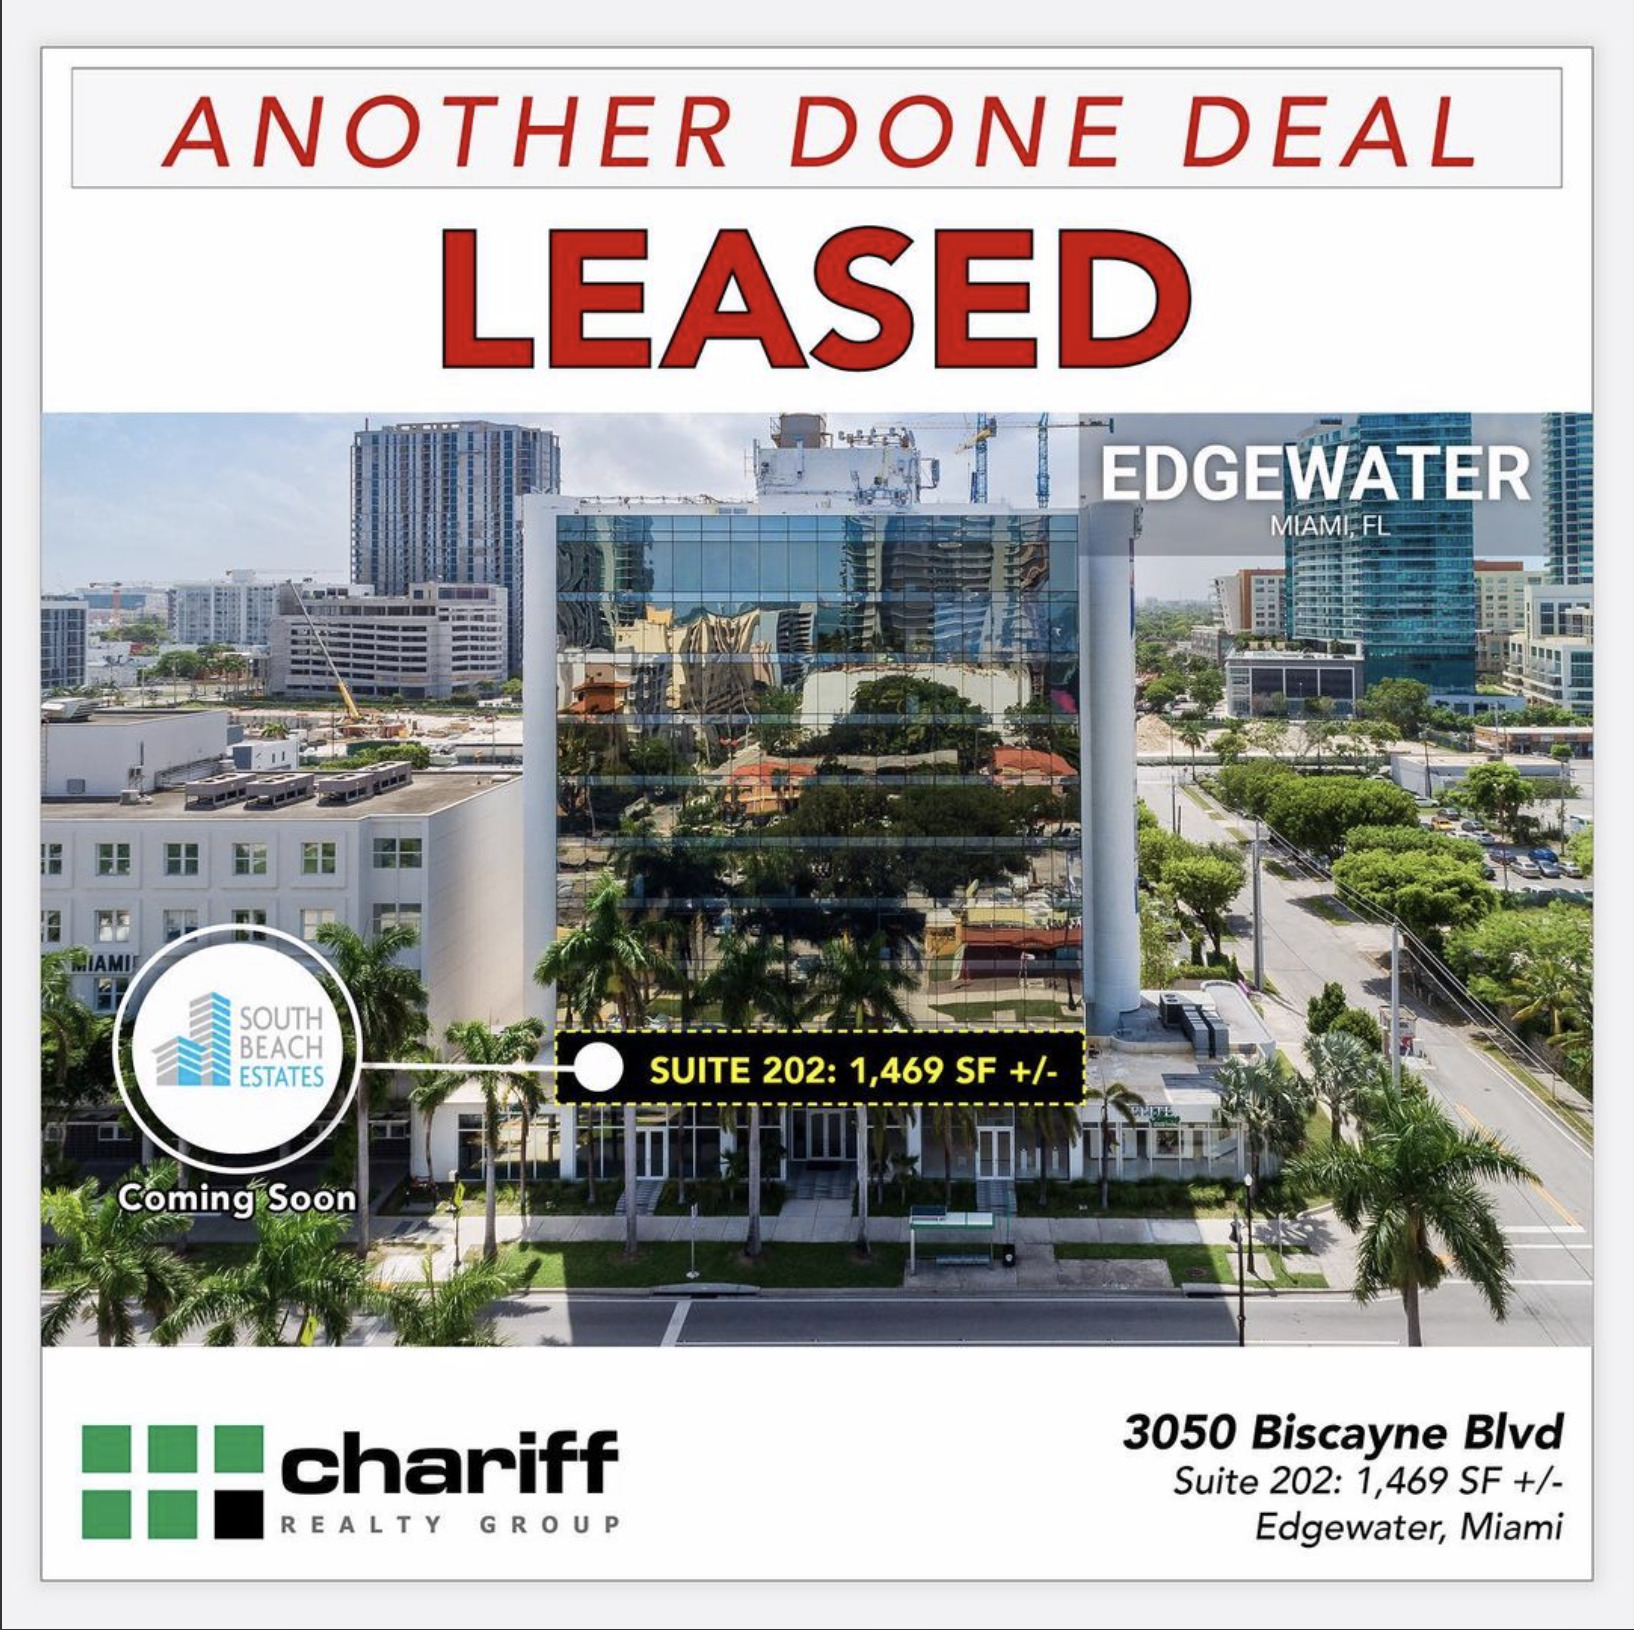 anotherdonedeal-leased-3050 biscayne blvd - Retail 1 - Edgewater - Miami - Florida 33137 - Chariff Realty Group